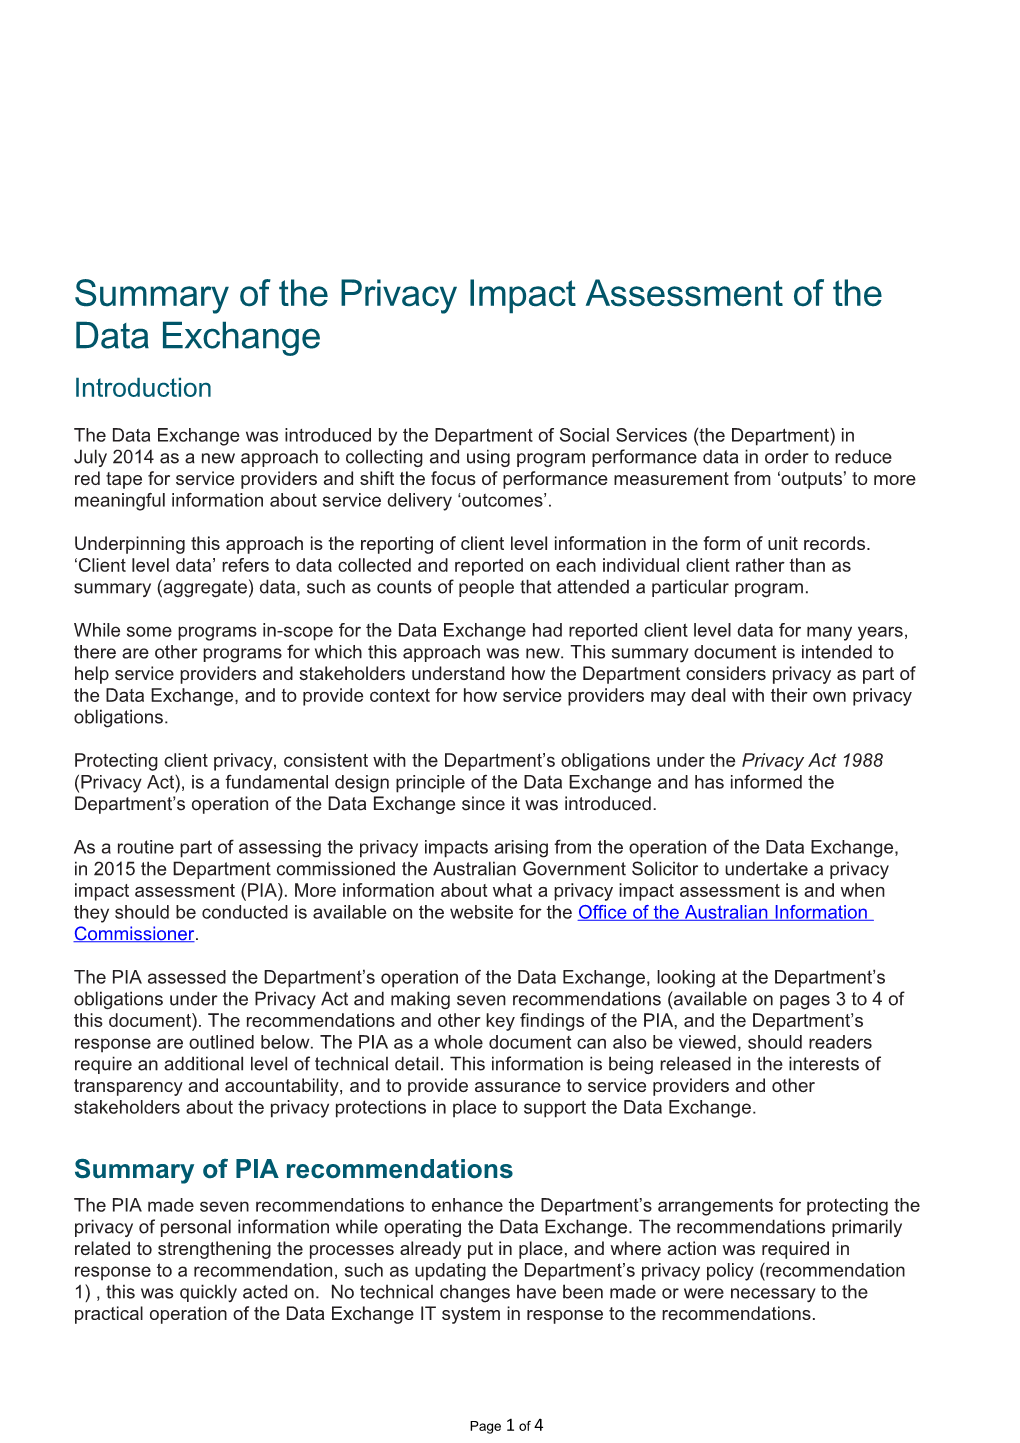 Summary of the Privacy Impact Assessment of the Data Exchange